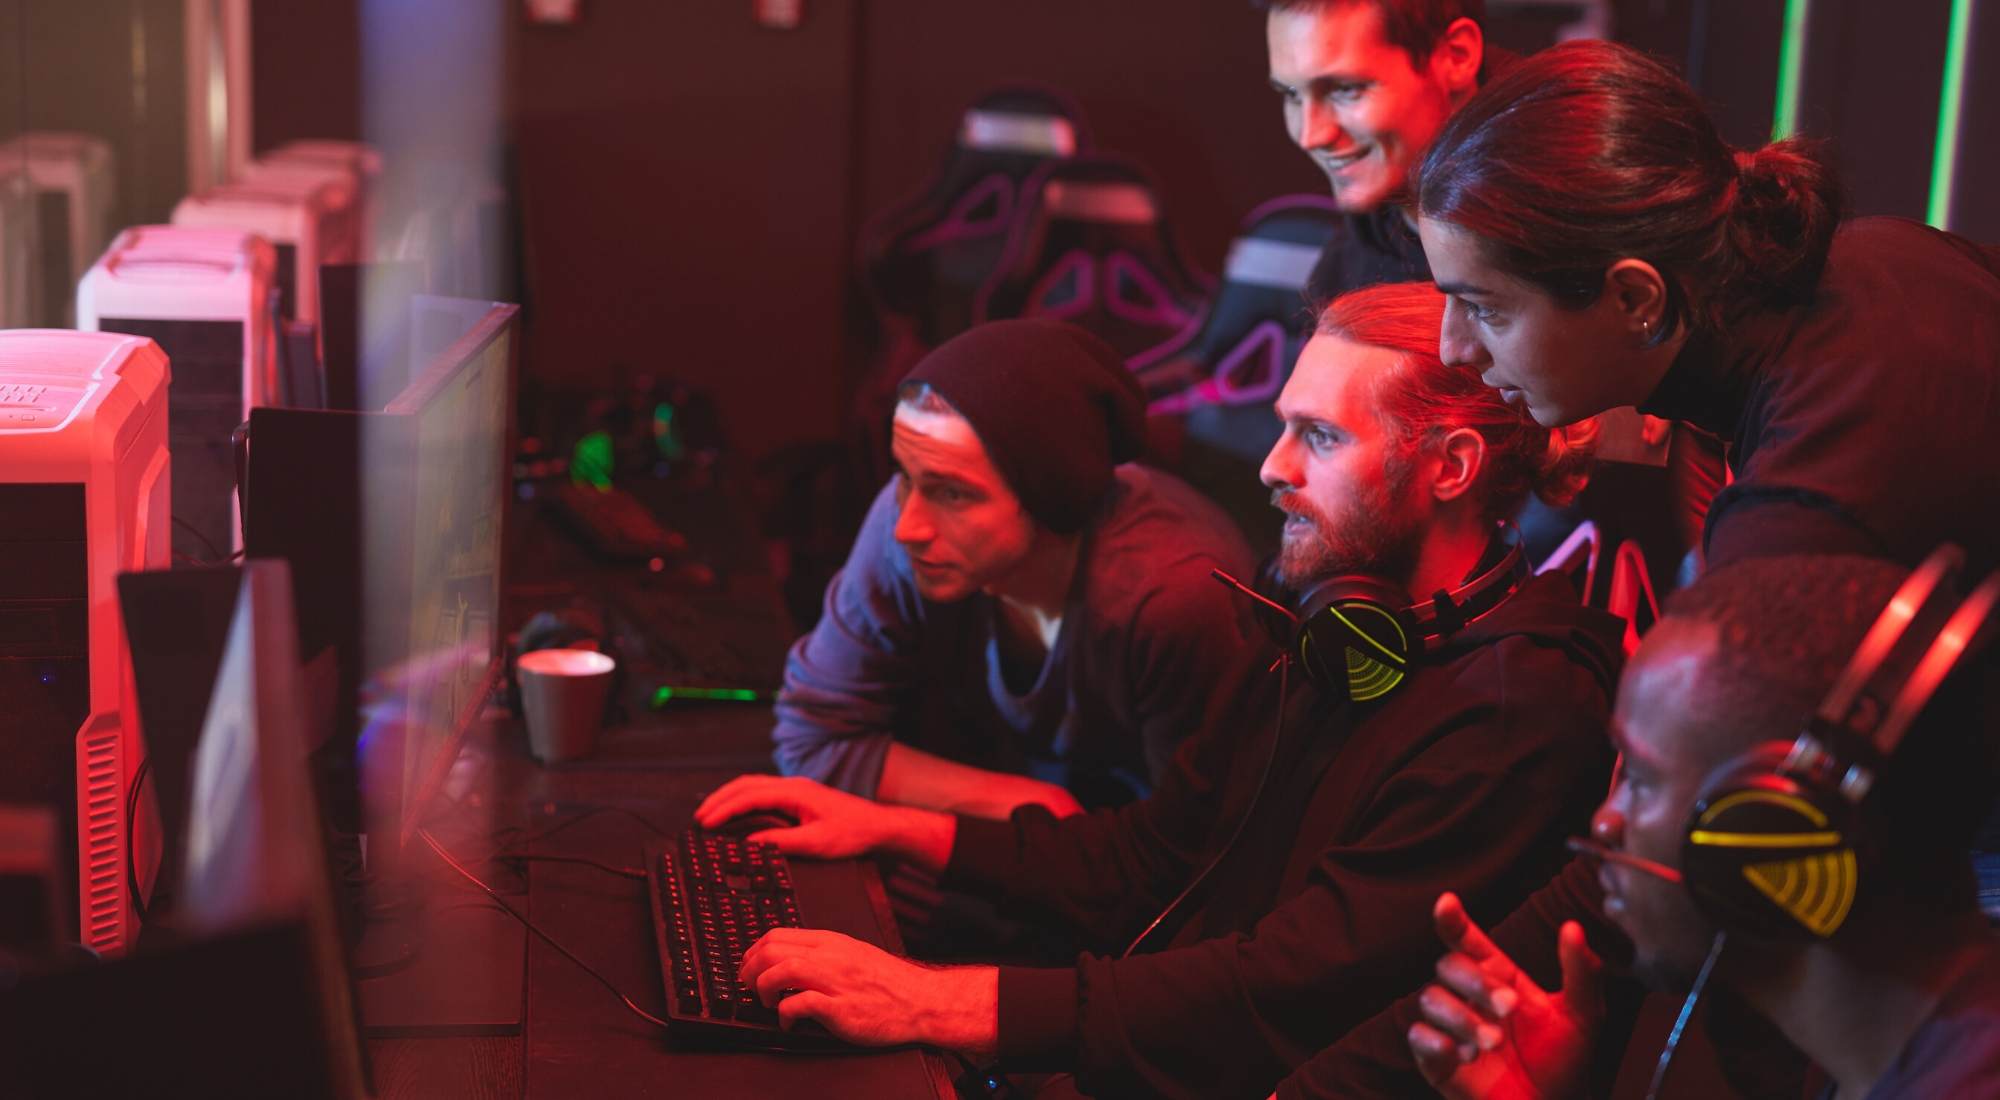 best sites for esports betting